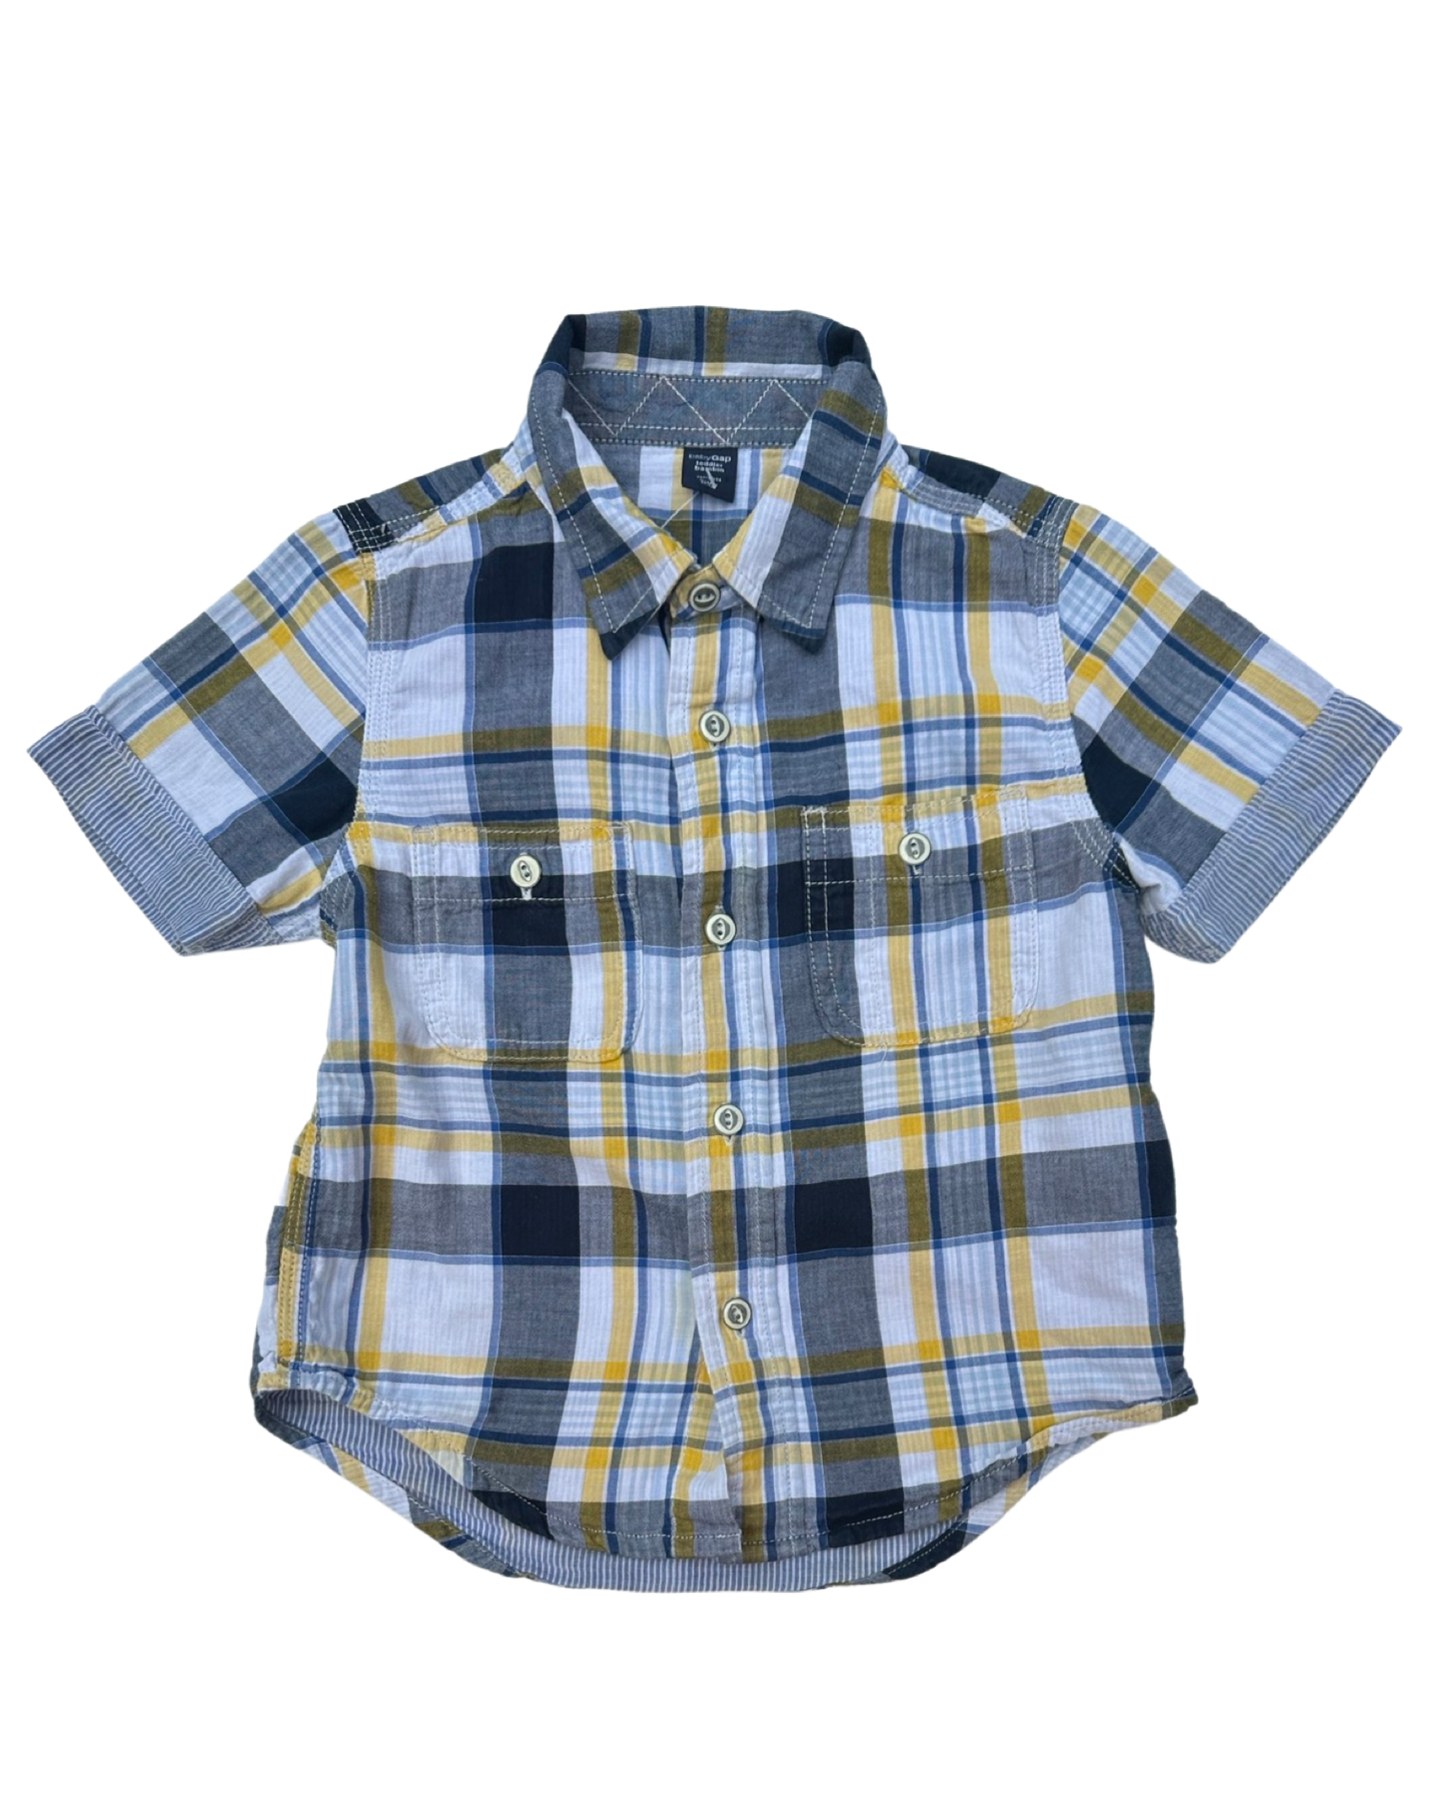 Baby Gap checked cotton shirt (size 1-2yrs)